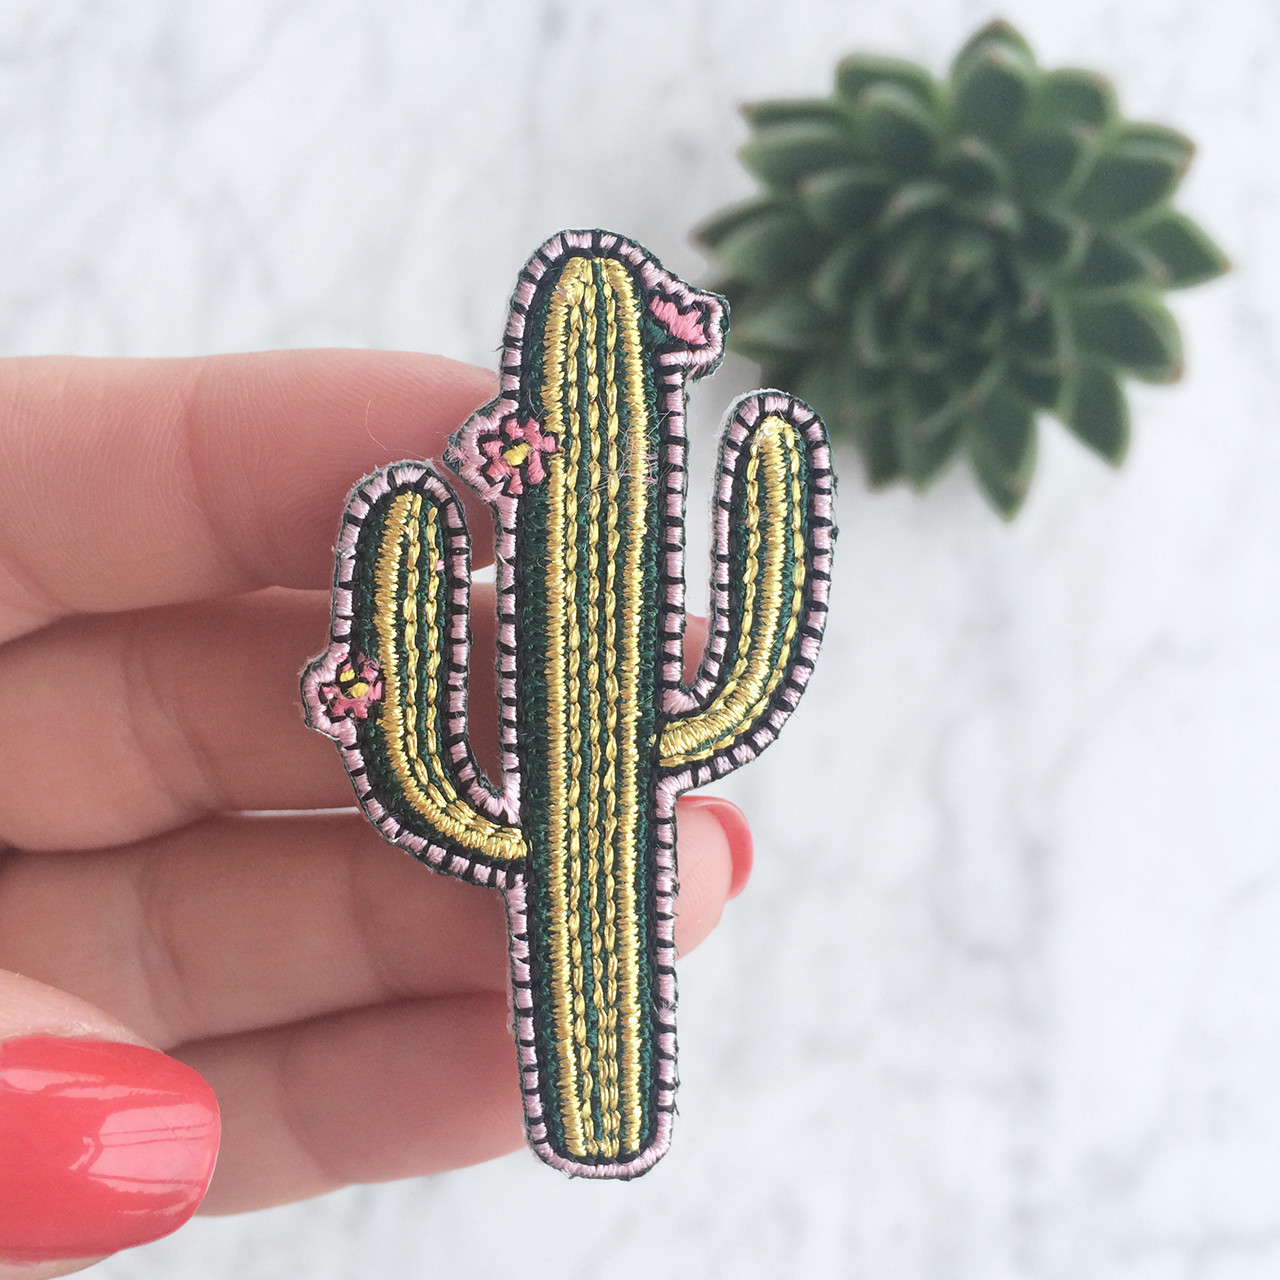 Cactus Embroidered Iron On Patches Plants Applique DIY Sewig Crafts Plant